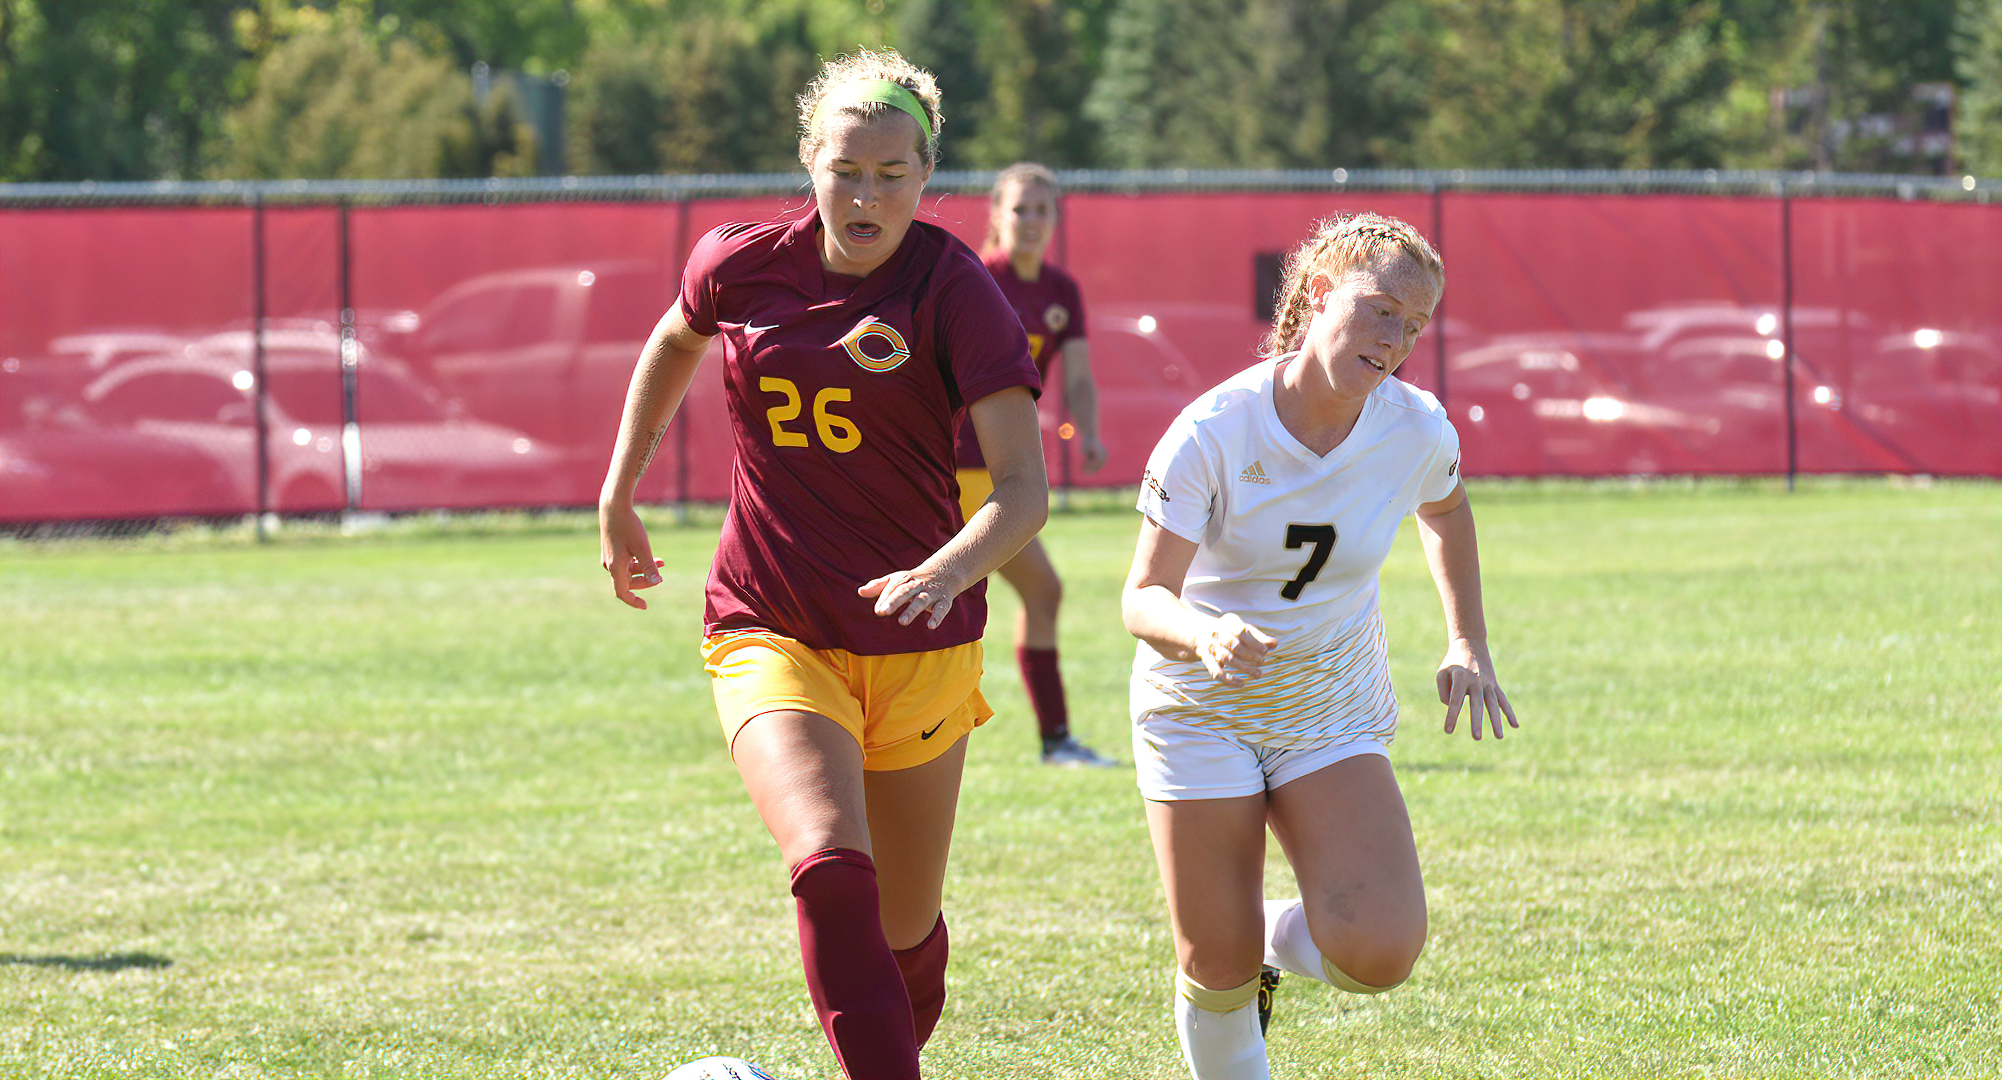 Junior Sophia Robinson scored her second goal of the season in the Cobbers' game at Augsburg.